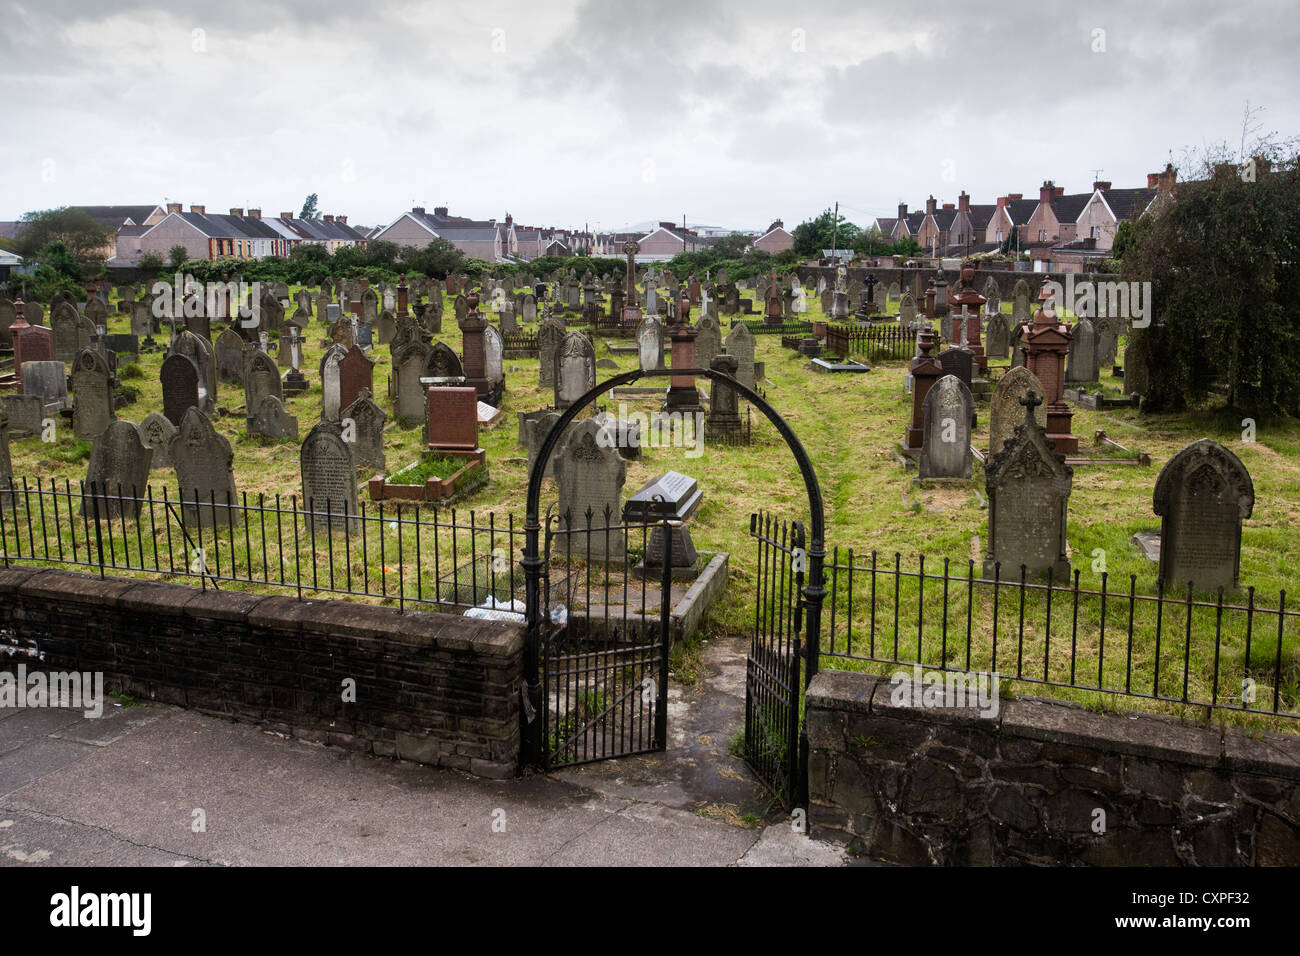 The cemetery in Aberavon, South Wales, UK Stock Photo